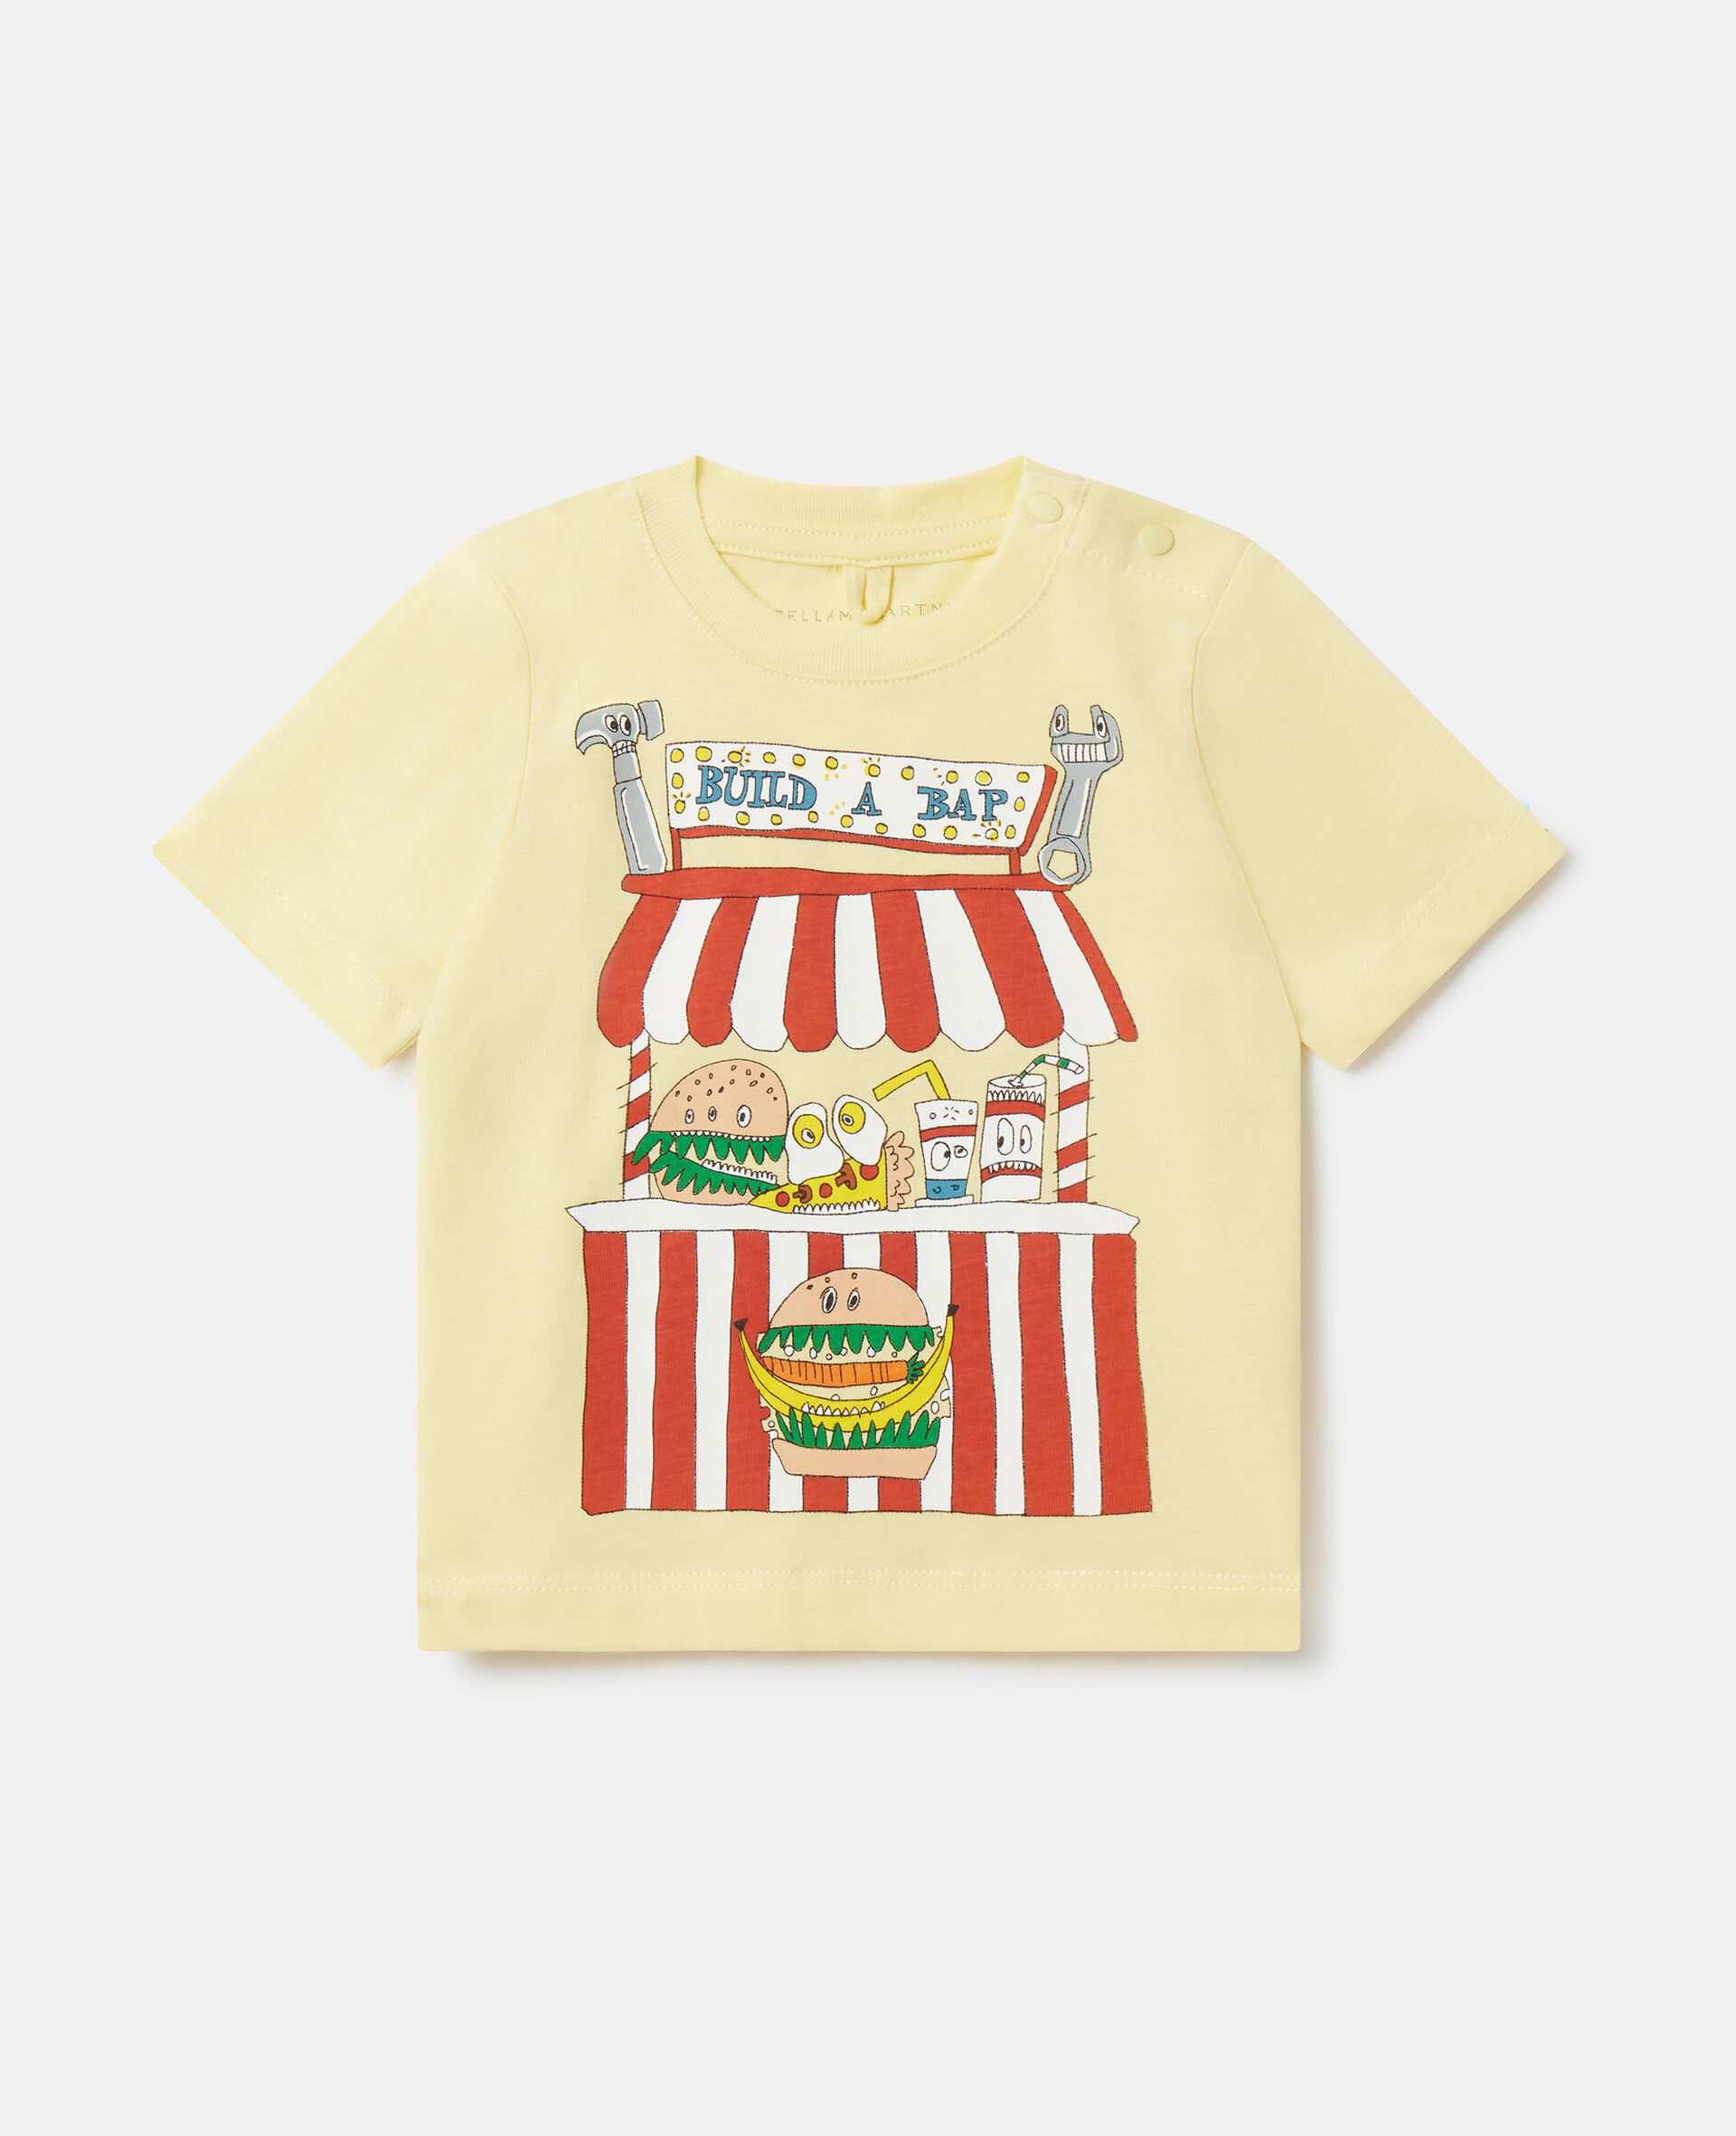 'Build A Bap' Stall T-Shirt-Multicoloured-large image number 0